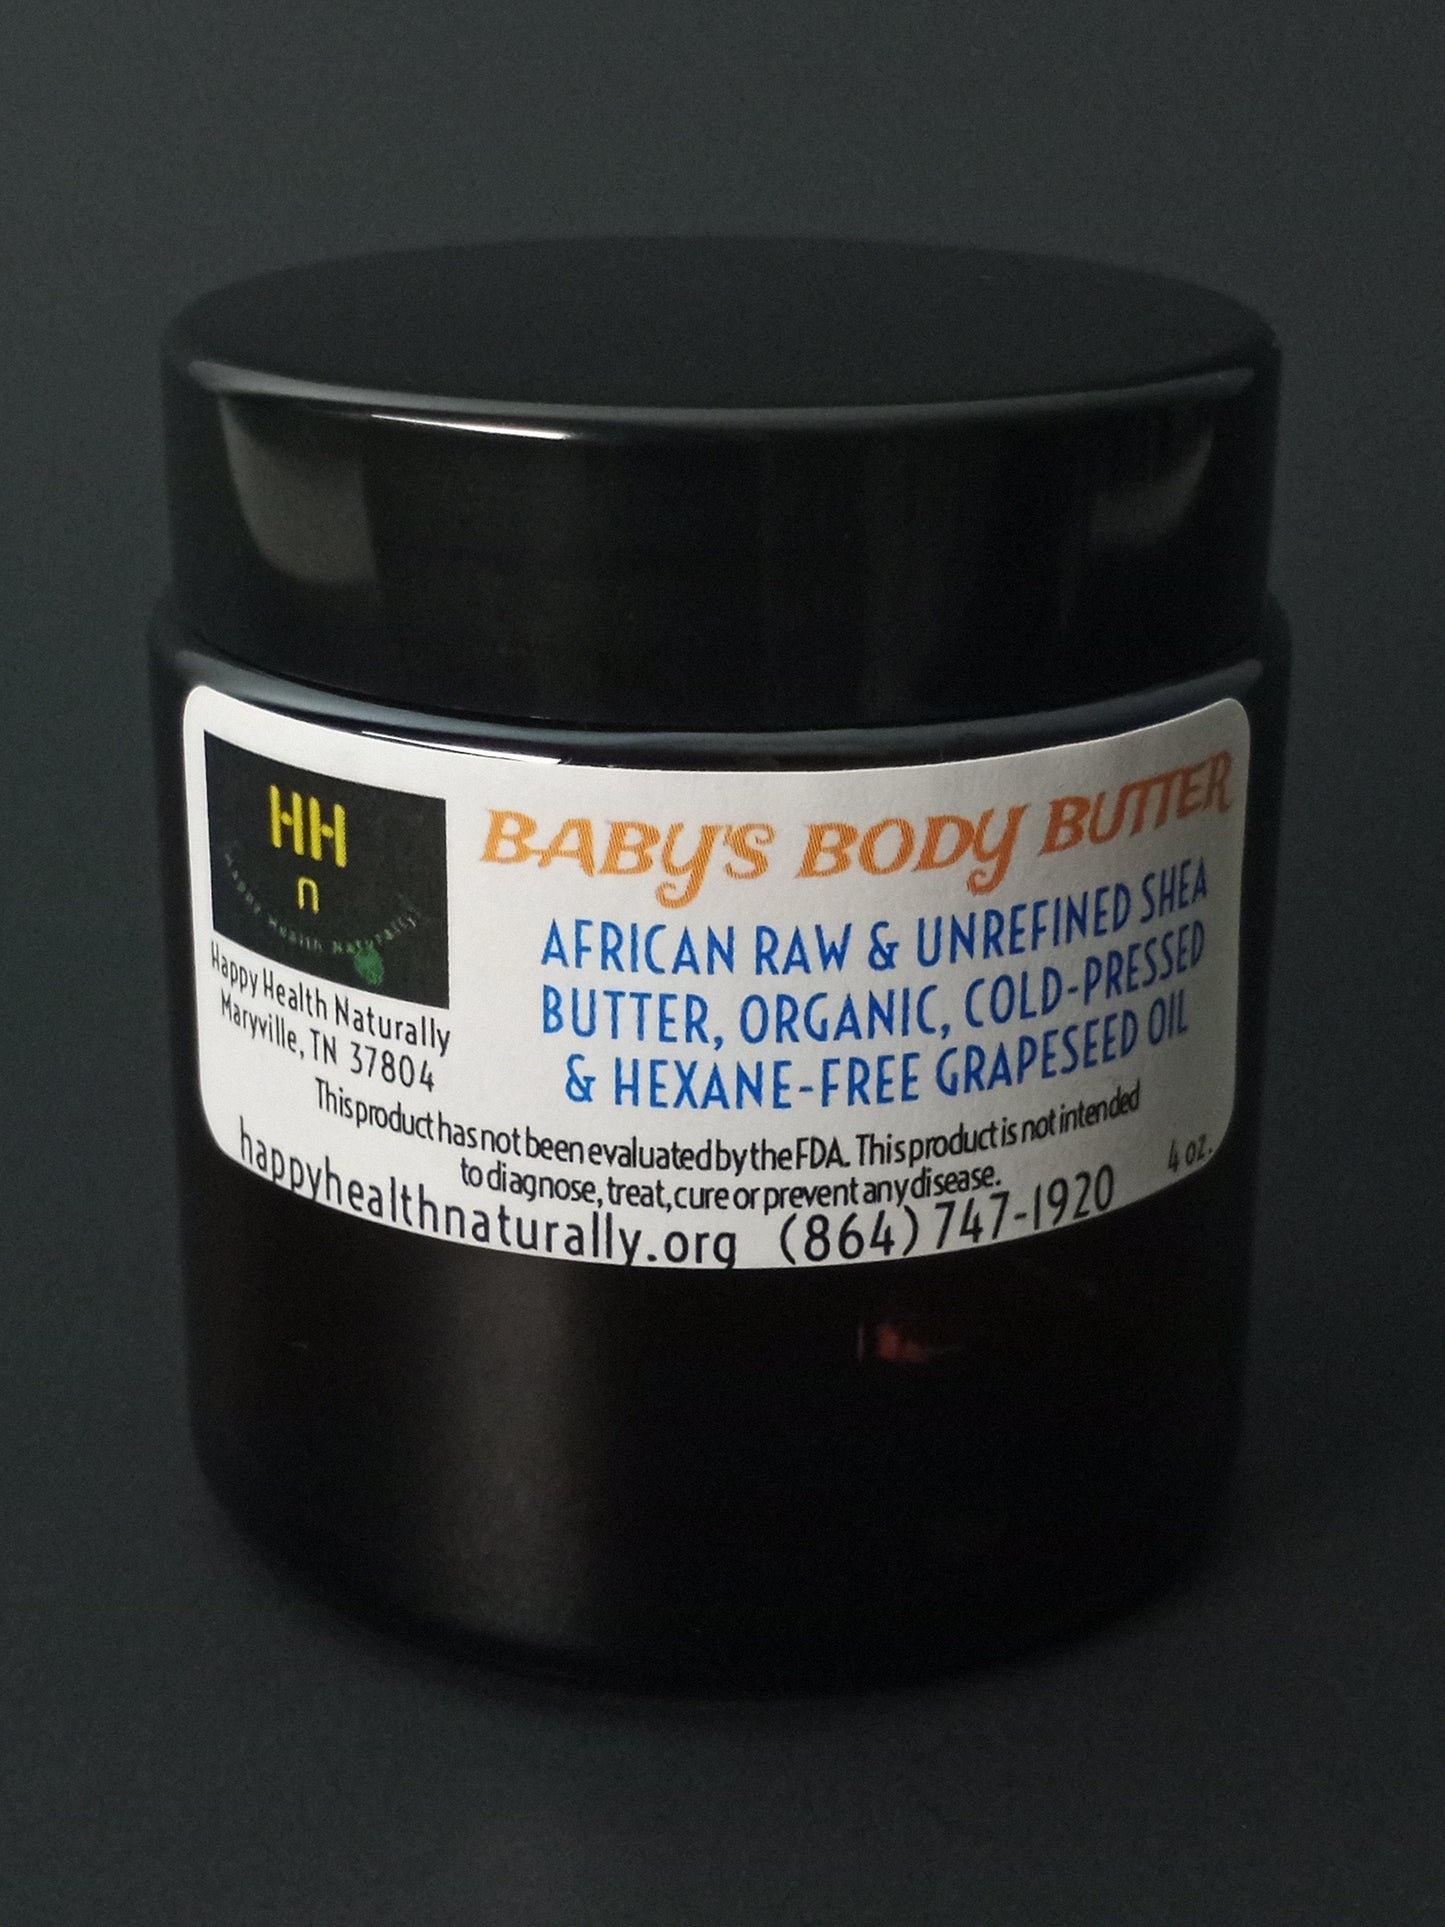 BABY'S BODY BUTTER